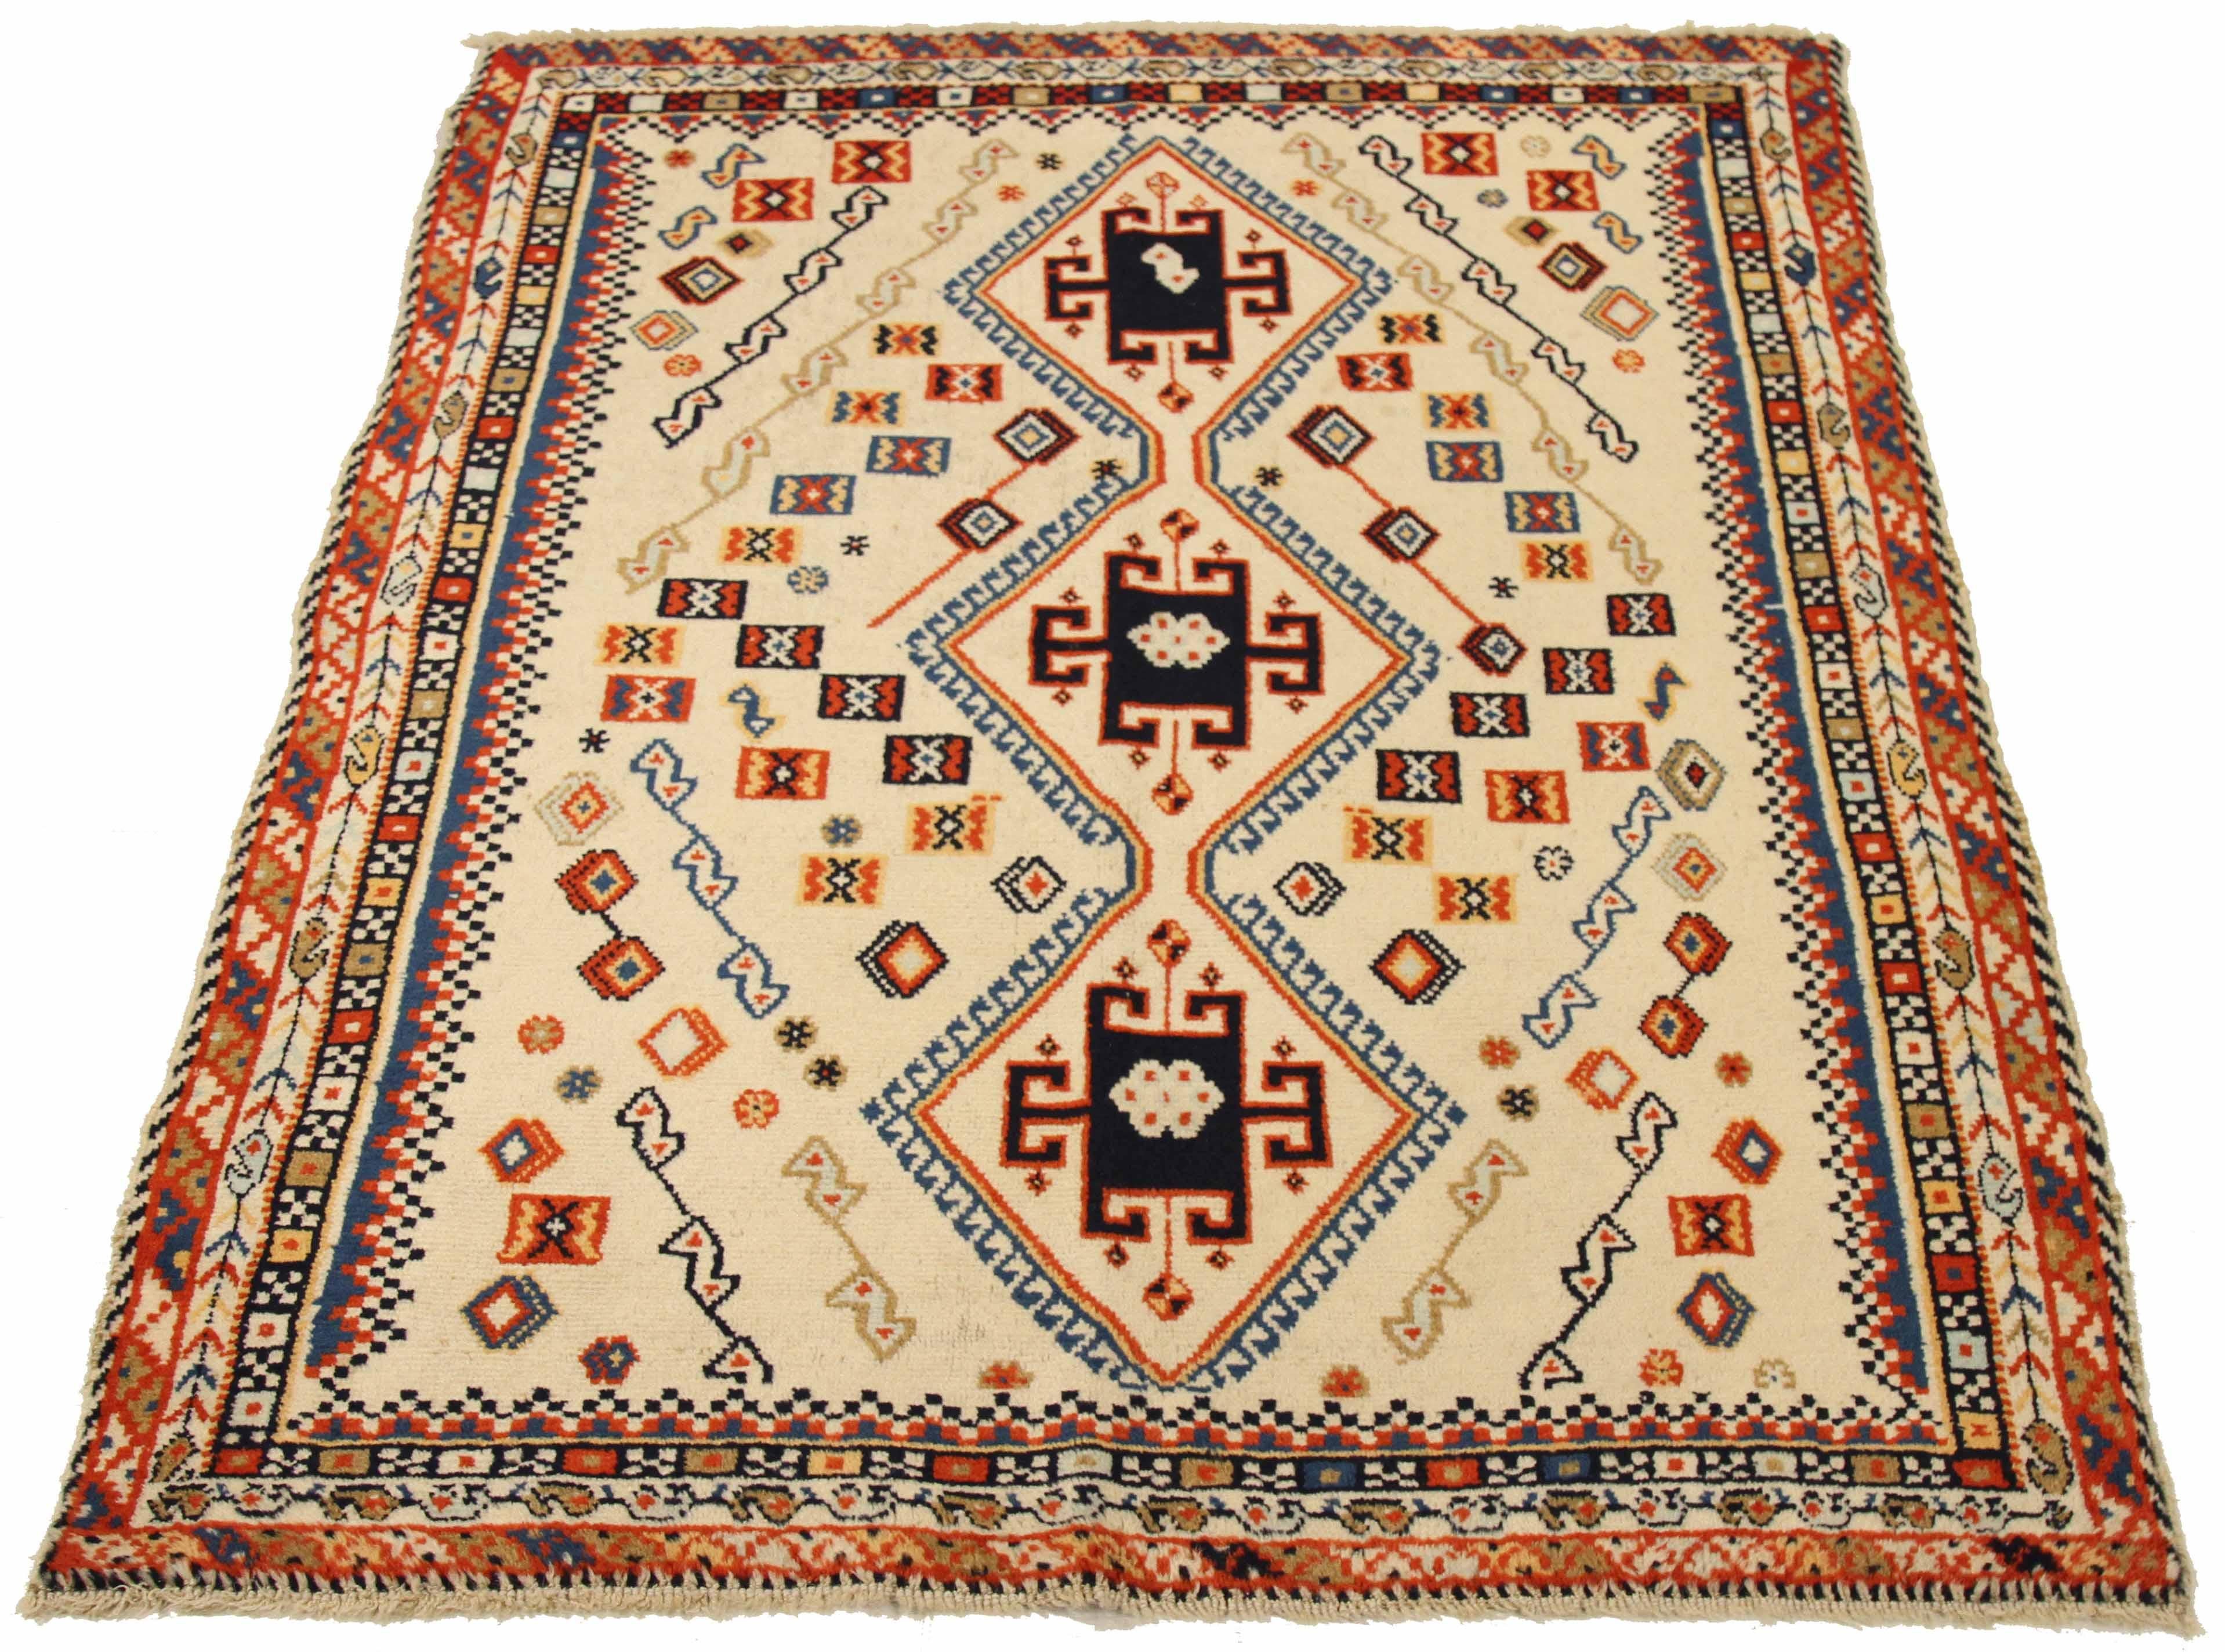 Antique Persian area rug handwoven from the finest sheep’s wool. It’s colored with all-natural vegetable dyes that are safe for humans and pets. It’s a traditional Shiraz design handwoven by expert artisans. It’s a lovely area rug that can be